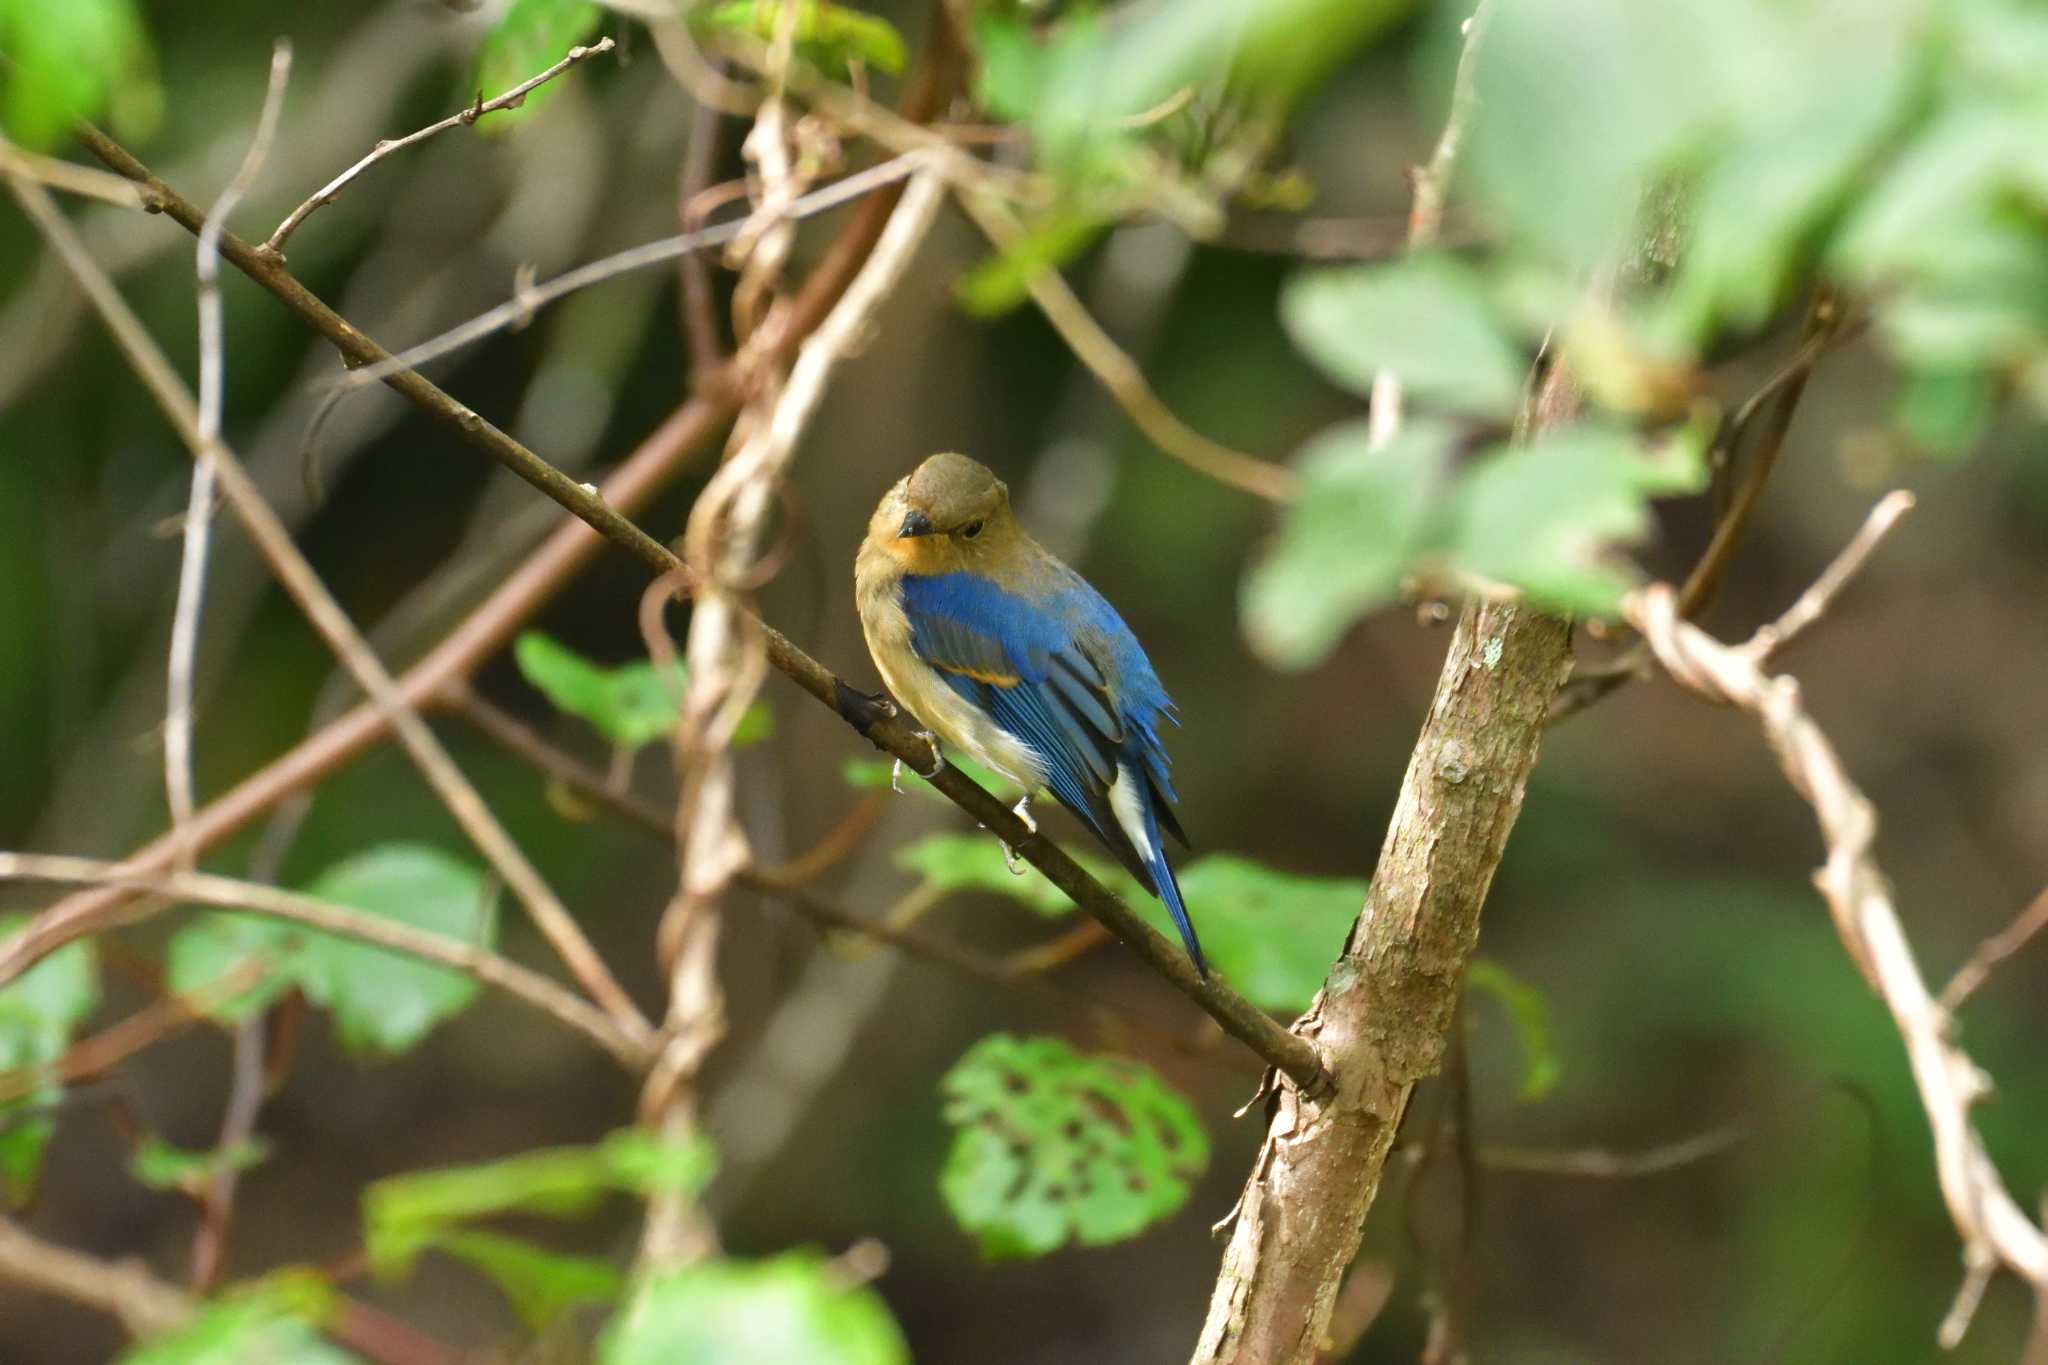 Photo of Blue-and-white Flycatcher at 十里木高原 by 80%以上は覚えてないかも